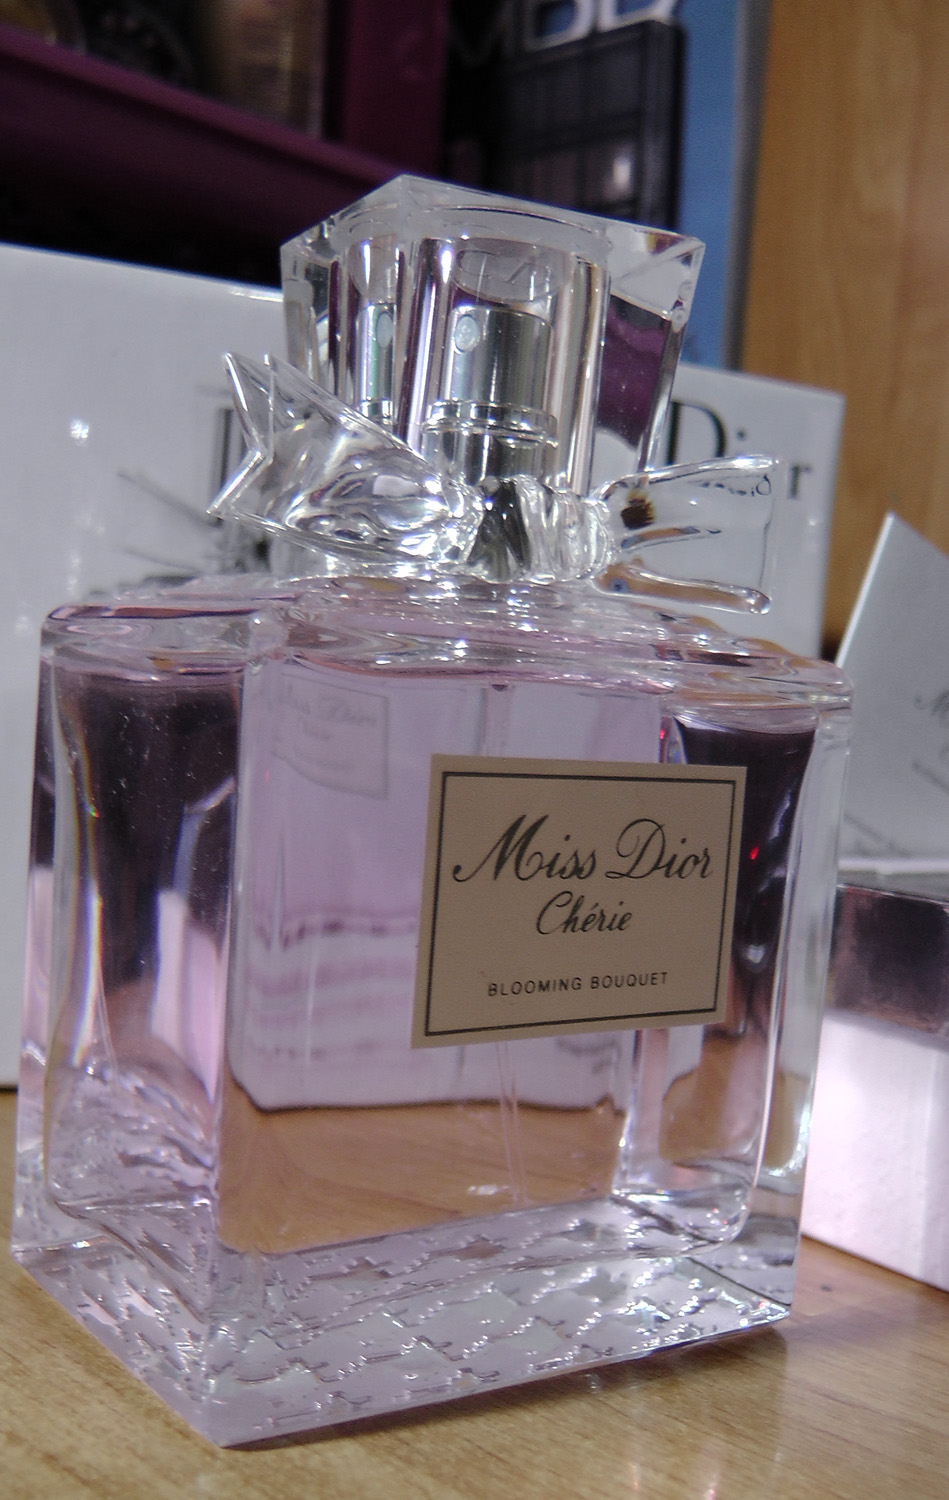 miss dior cherie blooming bouquet 100ml